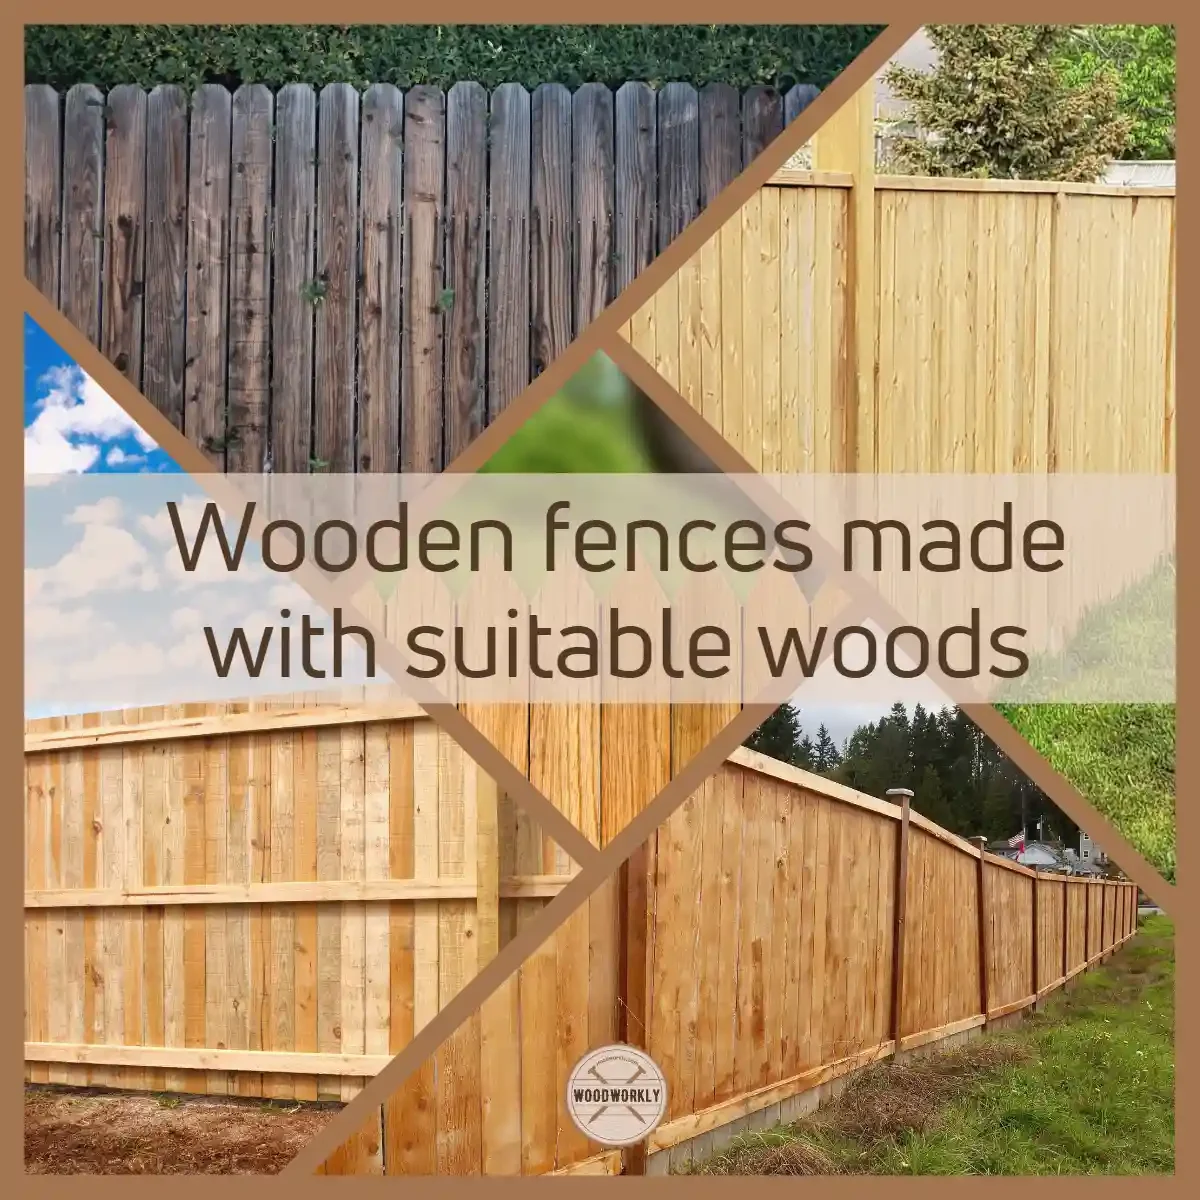 Wooden fences made with suitable woods